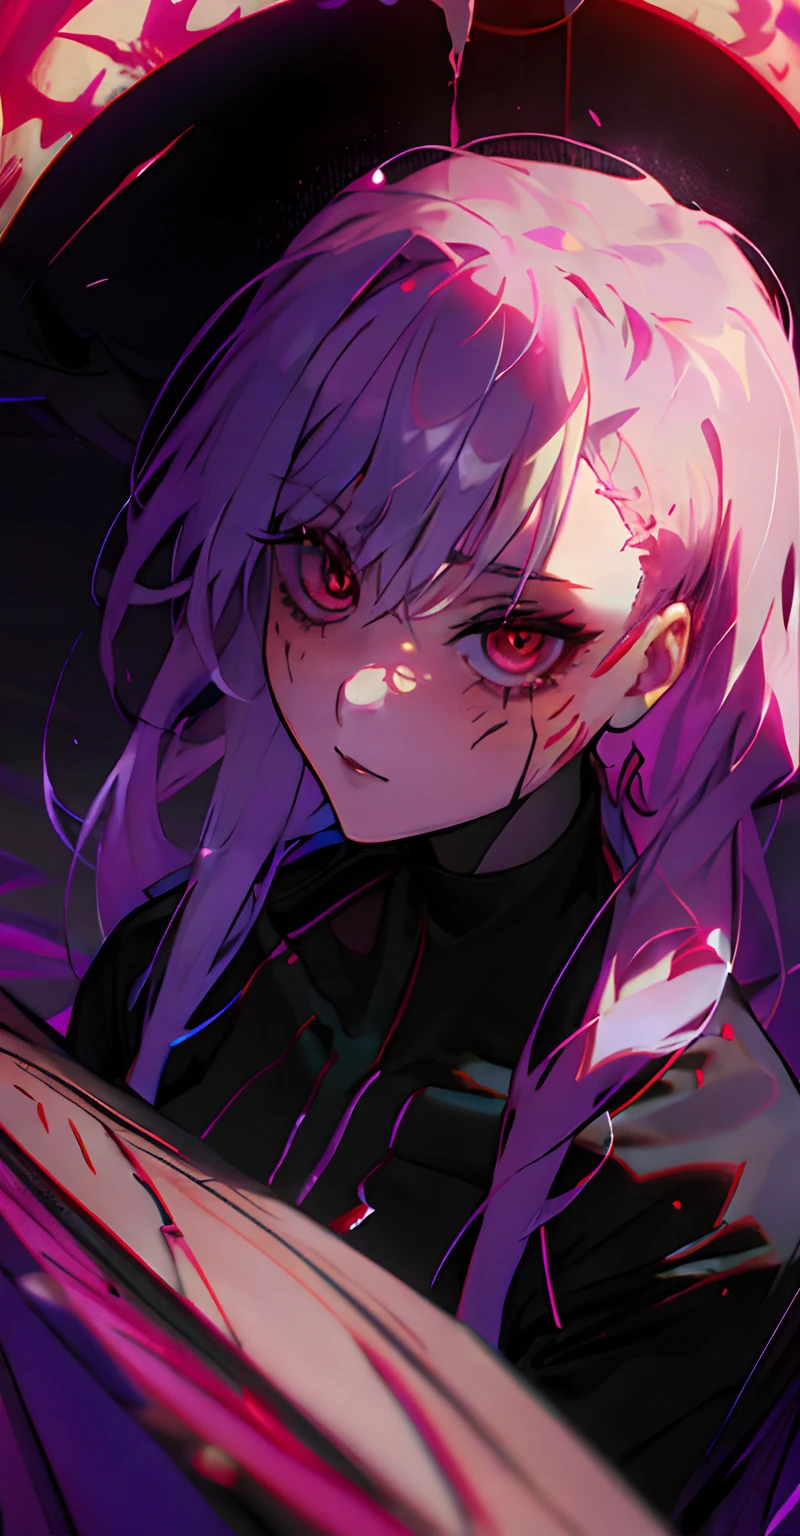 Anime girl looking into the darkness with horns and a crown on her head, Gapmoe Yandere Grimdark, with glowing red eyes, demon anime girl, Gothic Maiden anime girl, with glowing red eyes, Portrait Gapmoe Yandere Grimdark, anime monster girl, Best Anime 4K Konachan Wallpaper, Melted, vampire girl, Arte Zerochan, The Vampire,(((macro lens)))